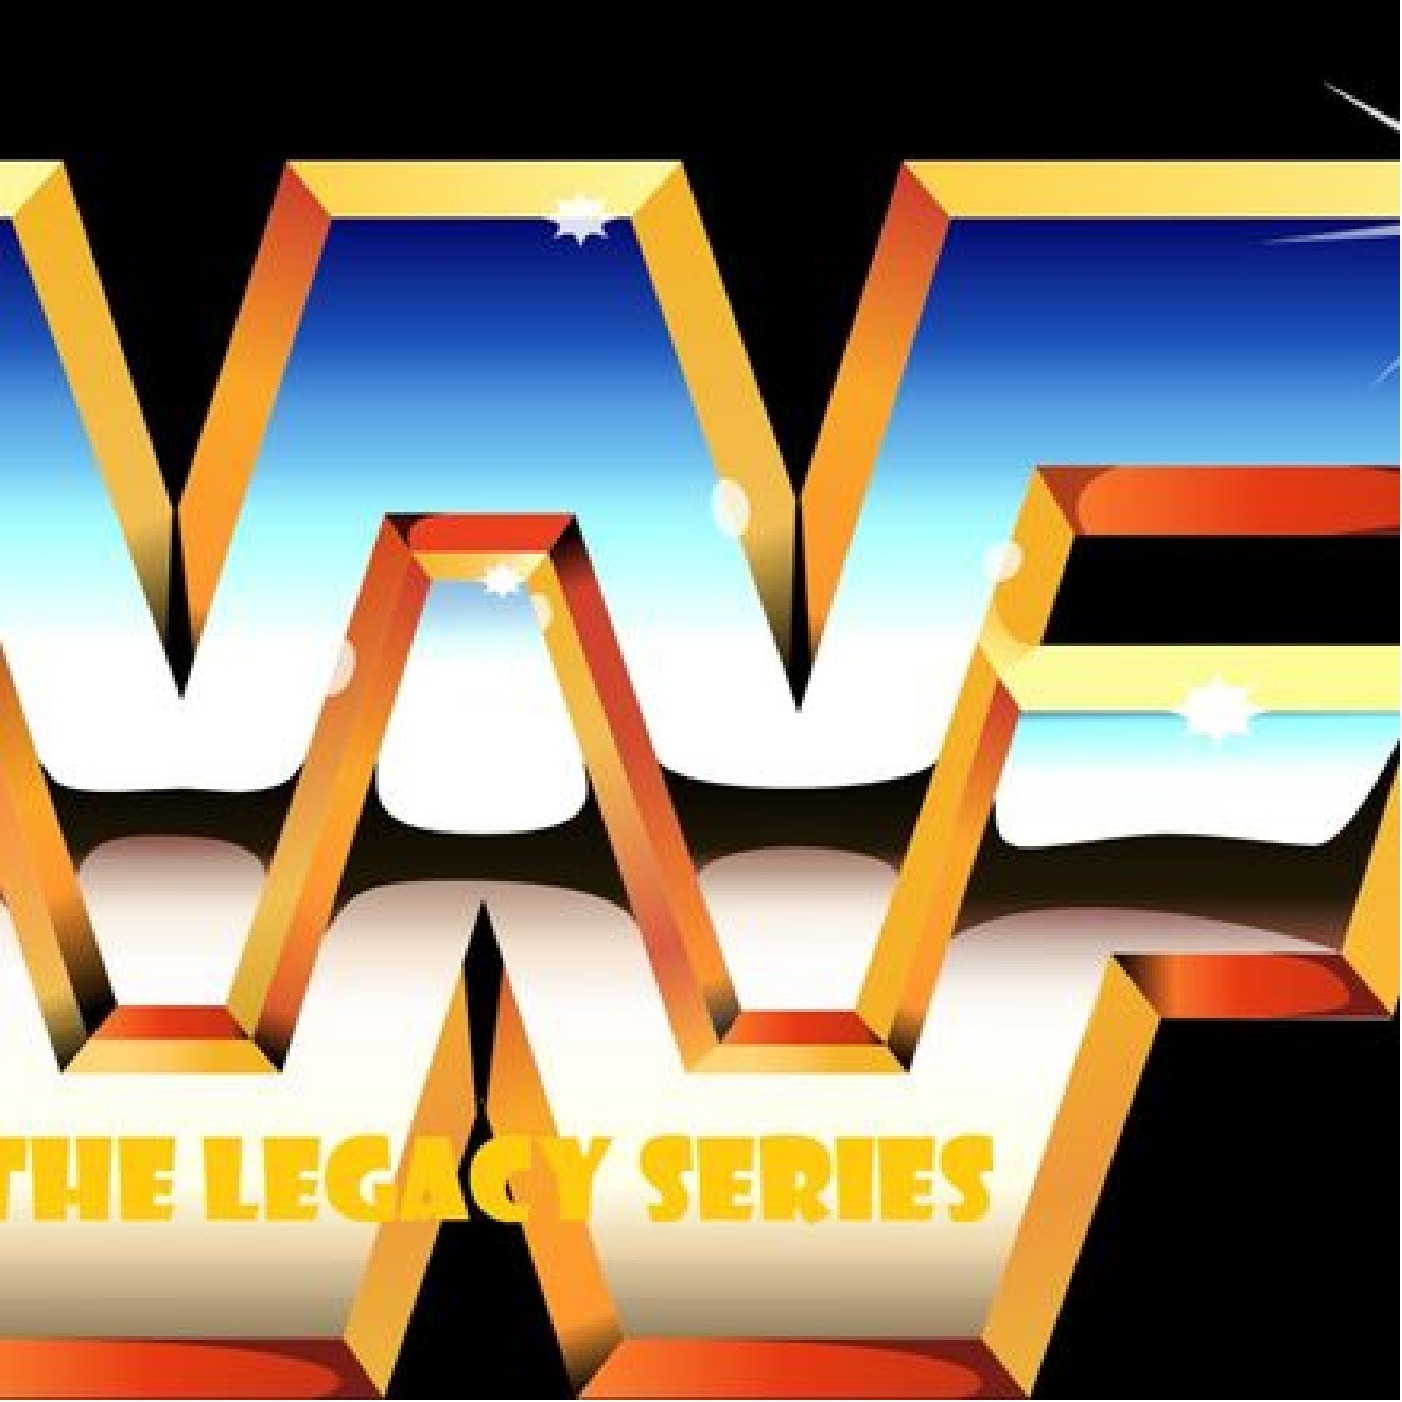 WWF: The Legacy Series - The Snake, The Deadman, and the Summer of '91